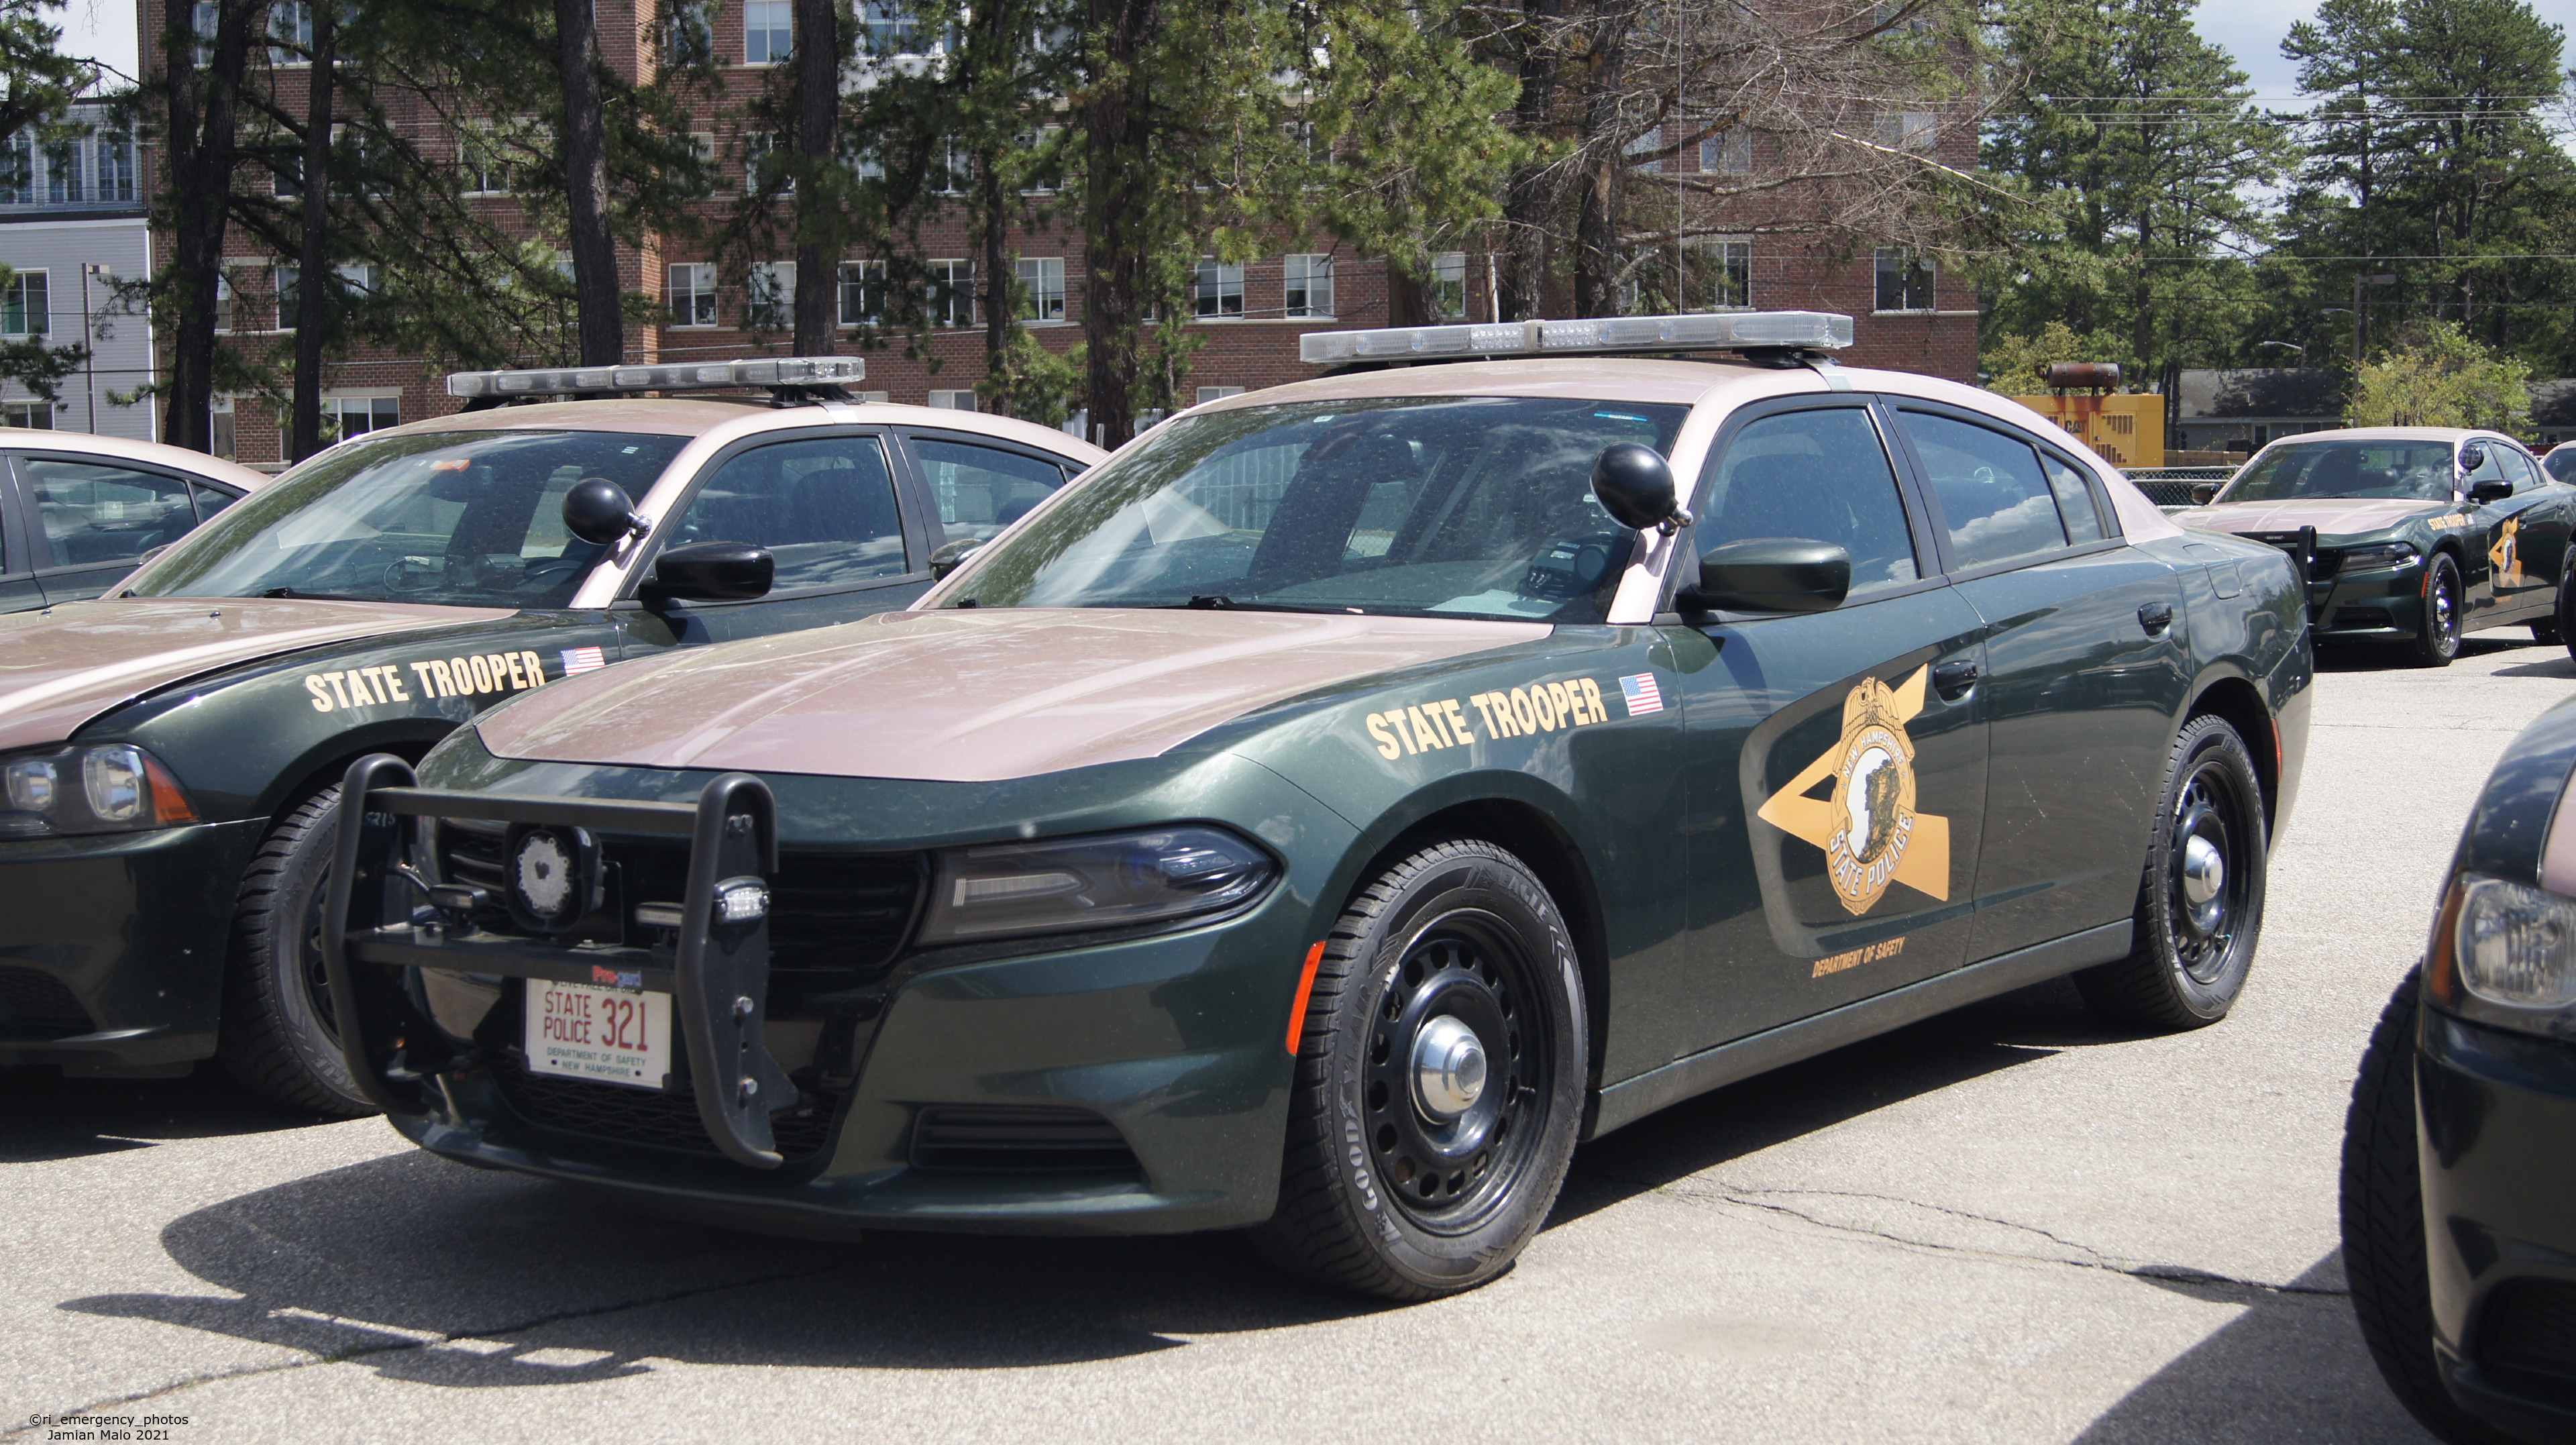 A photo  of New Hampshire State Police
            Cruiser 321, a 2015-2016 Dodge Charger             taken by Jamian Malo